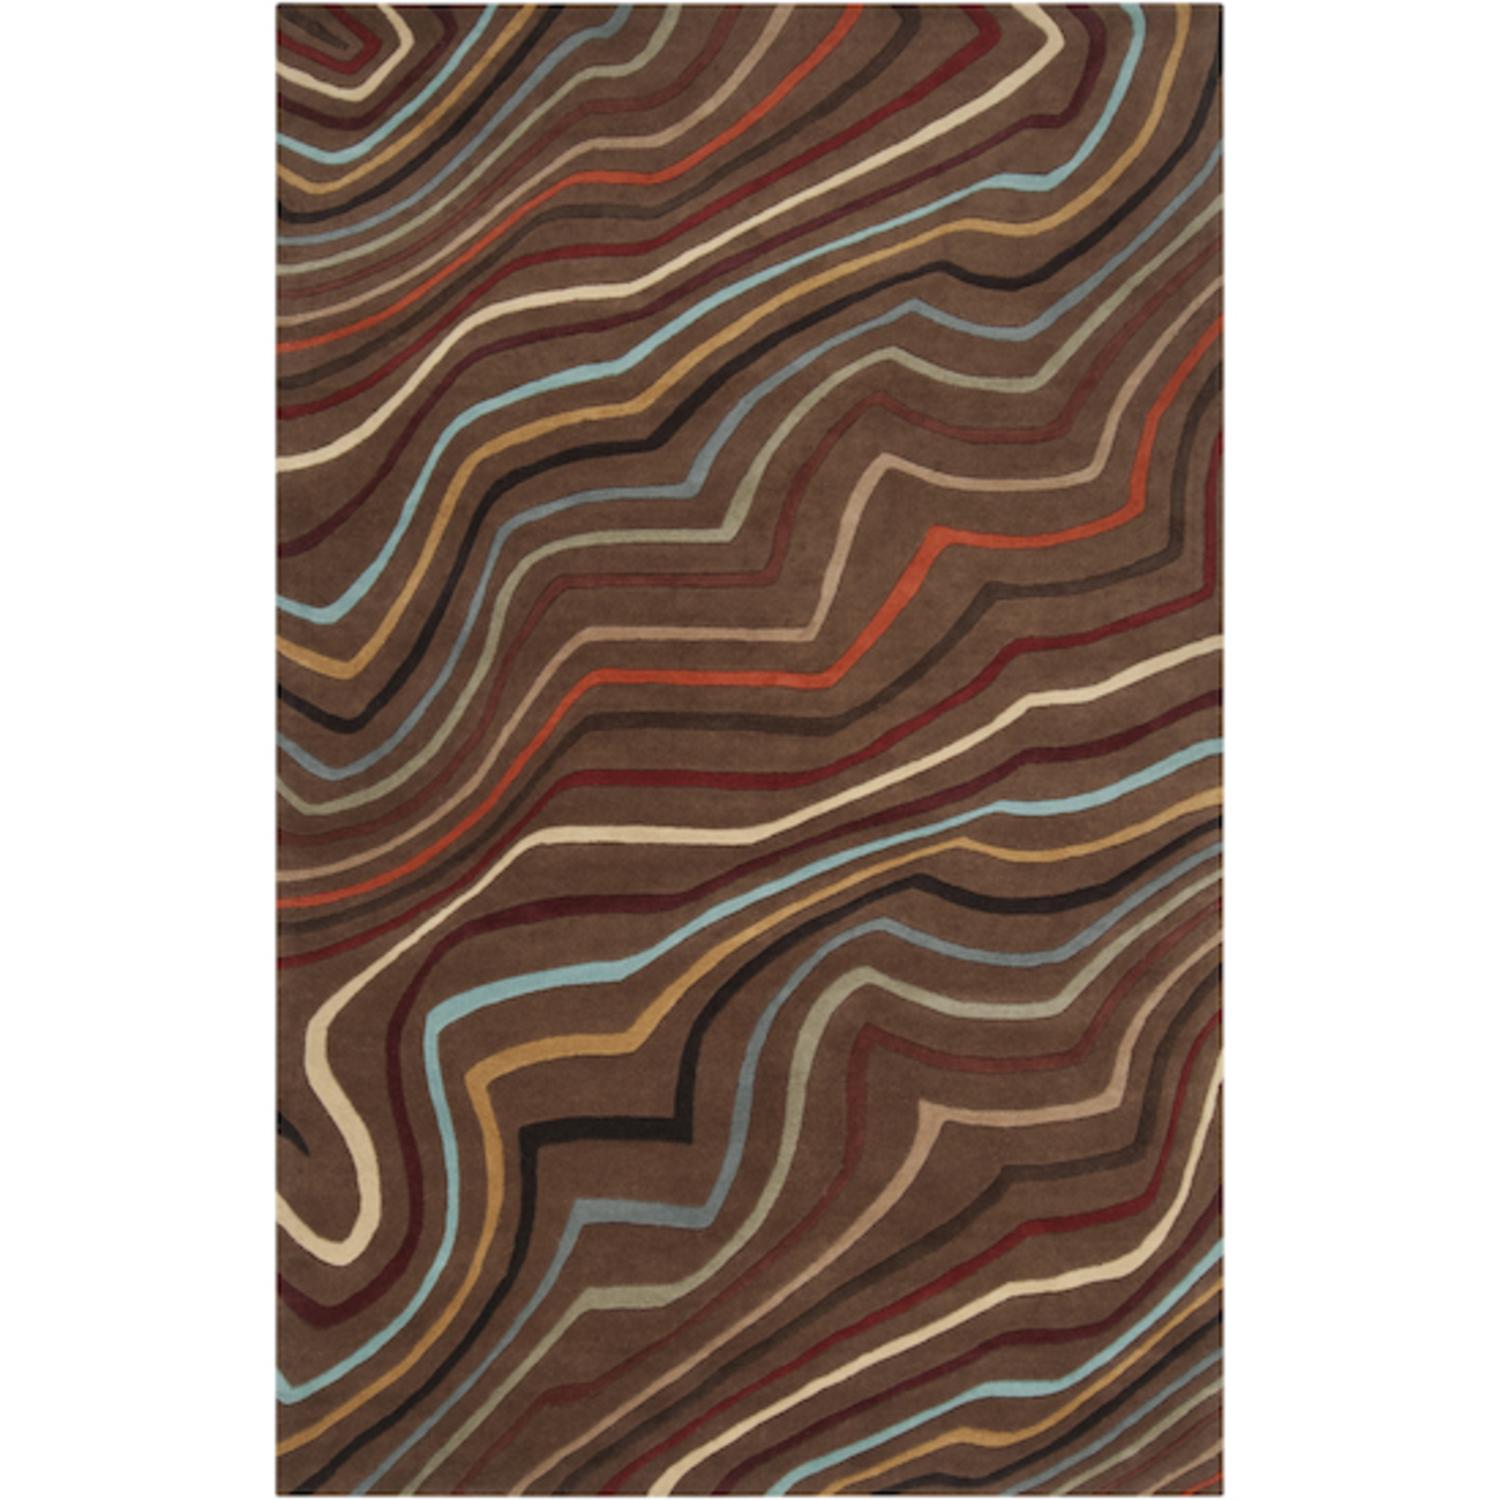 CC Home Furnishings 4' x 6' Florid Tides Espresso, Maroon and Sienna Hand Tufted Wool Area Throw Rug